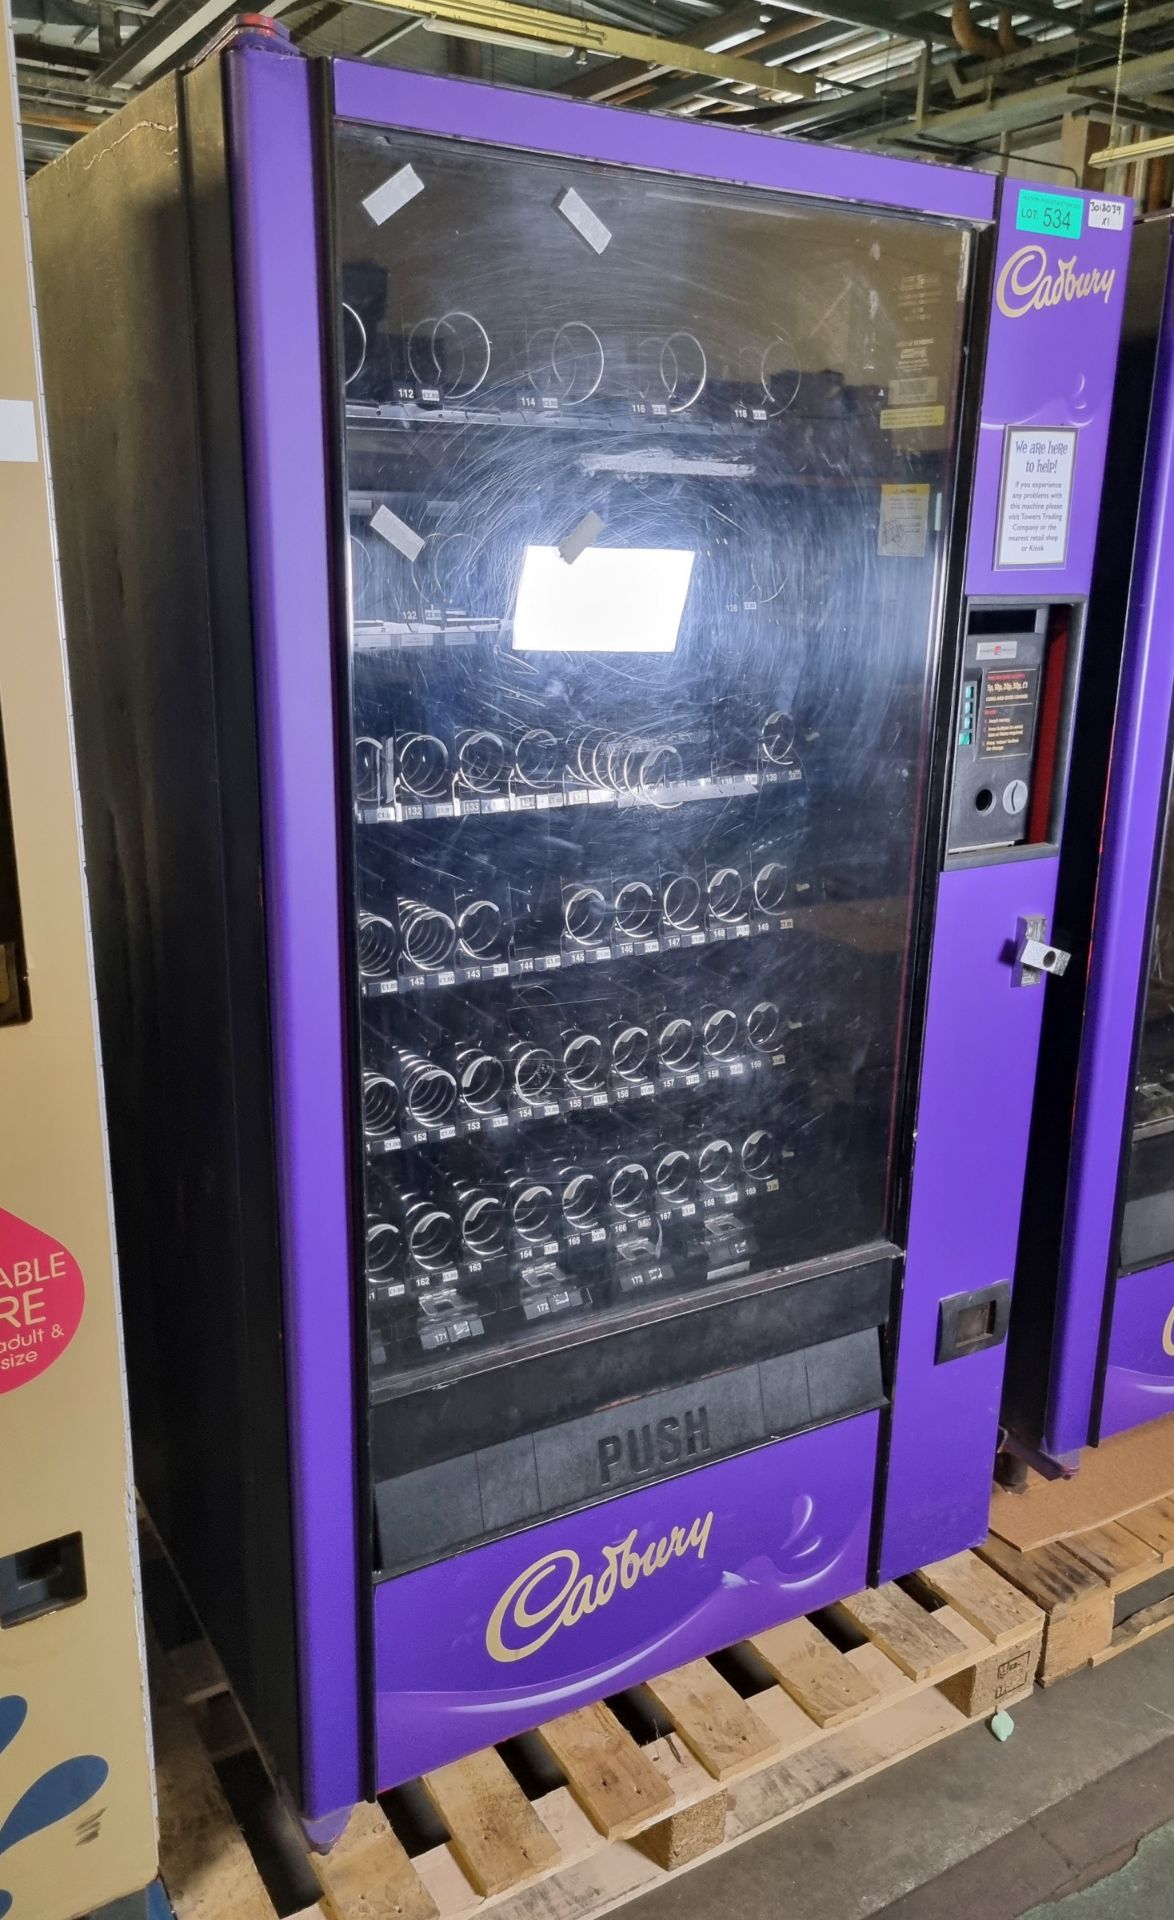 Automatic Product SNACKSHOP123C refrigerated vending machine - NO KEYS - Image 4 of 4